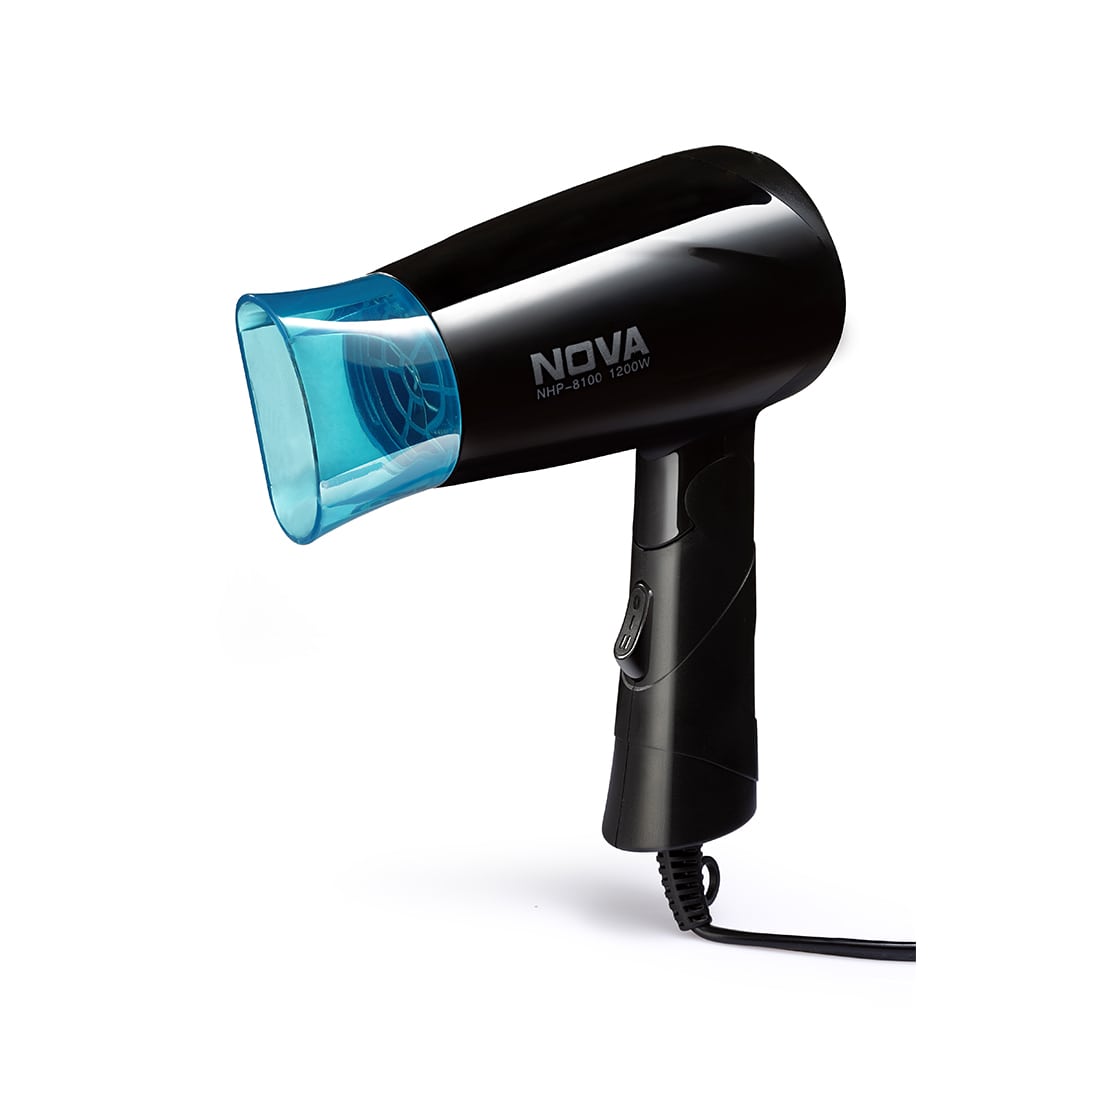 NOVA NHP 8109 Hair Dryer Price in India Full Specifications  Offers   DTashioncom